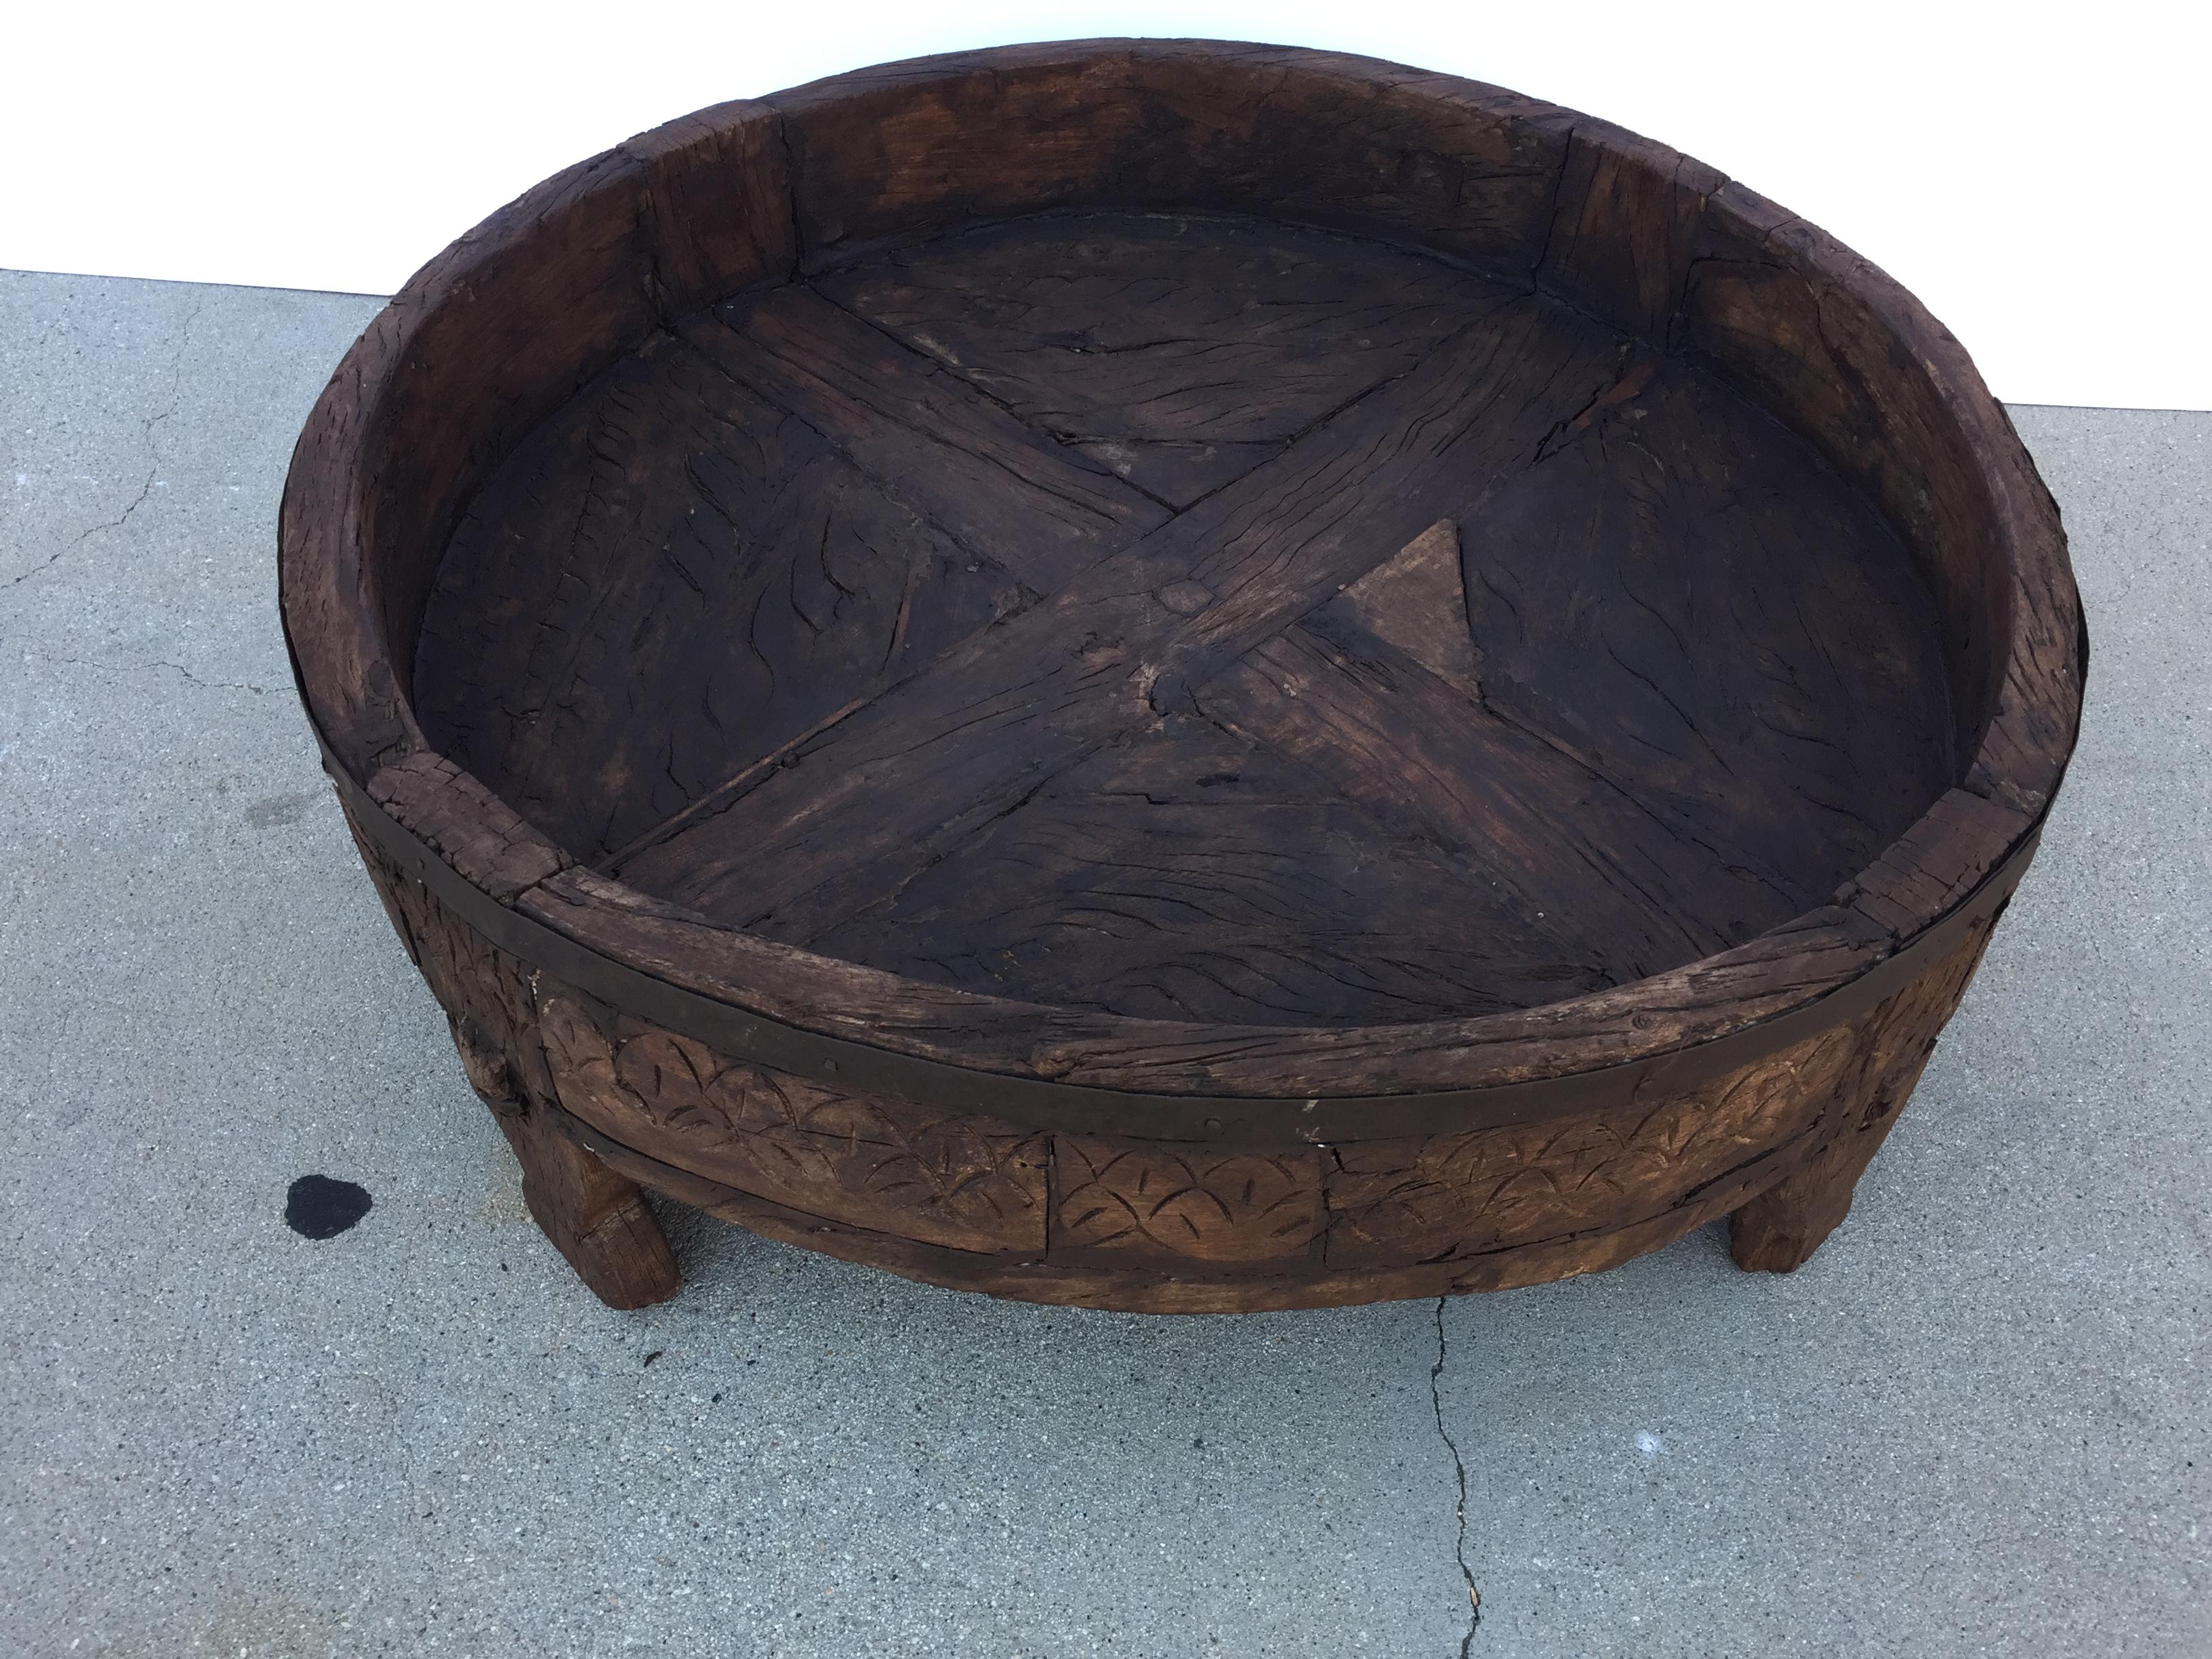 Large hand carved wood Indian grinder tribal teak table.
Dark walnut color hand carved with geometric African design.
Handcrafted of wood and iron, hand carved with geometric Ethnic tribal design.
Very sturdy rustic wood table with nice patina,